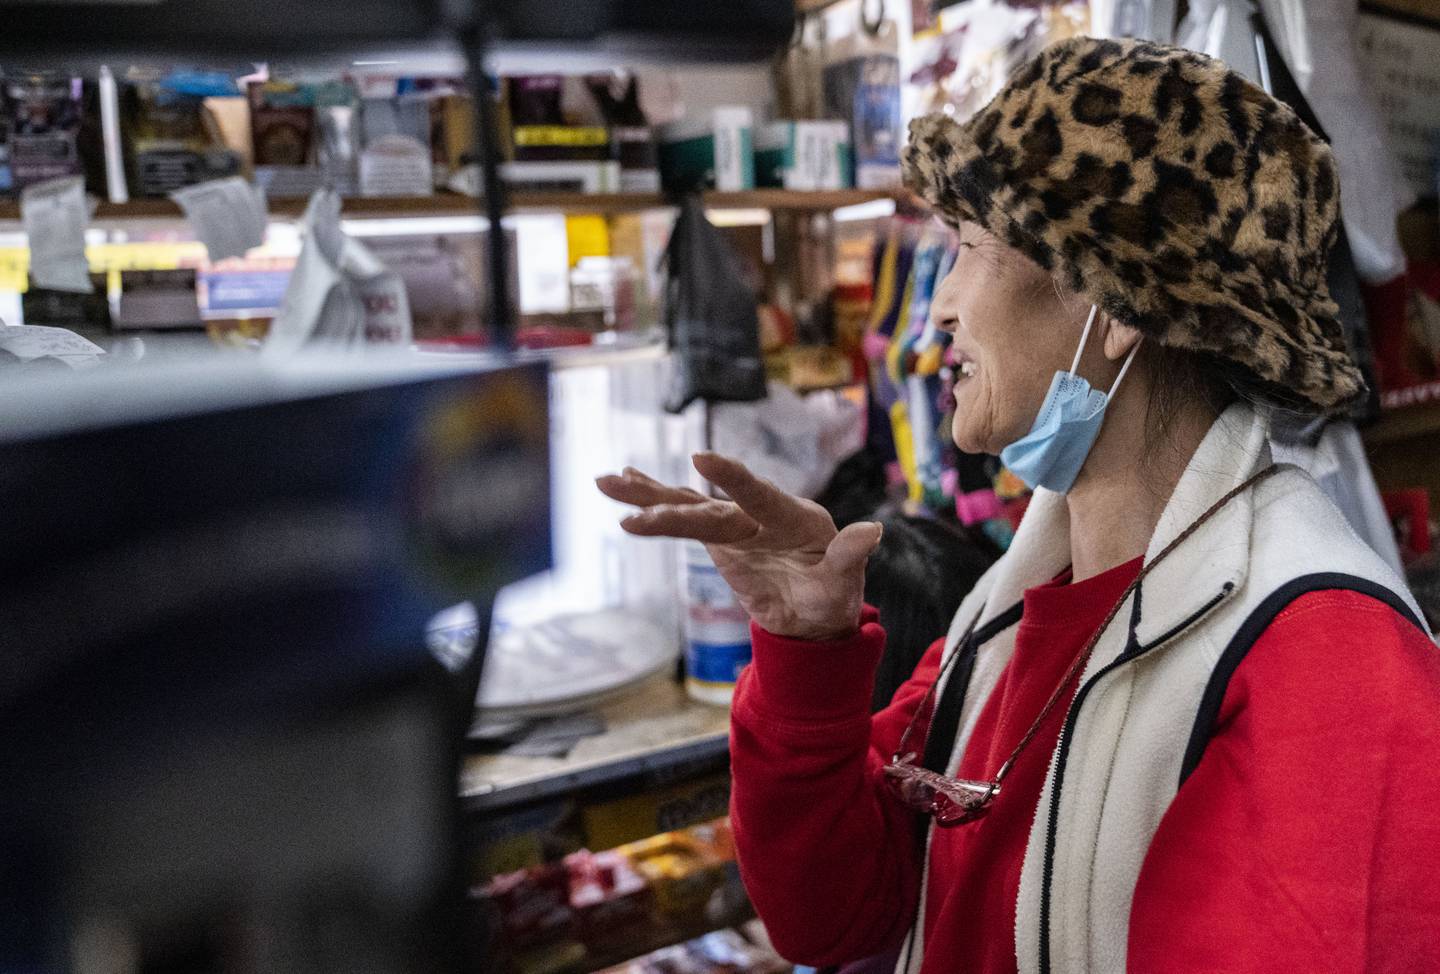 Yong Sun Pak waves goodbye to customers as they check out at Lee's Mini Market, in Baltimore, Thursday, December 1, 2022.